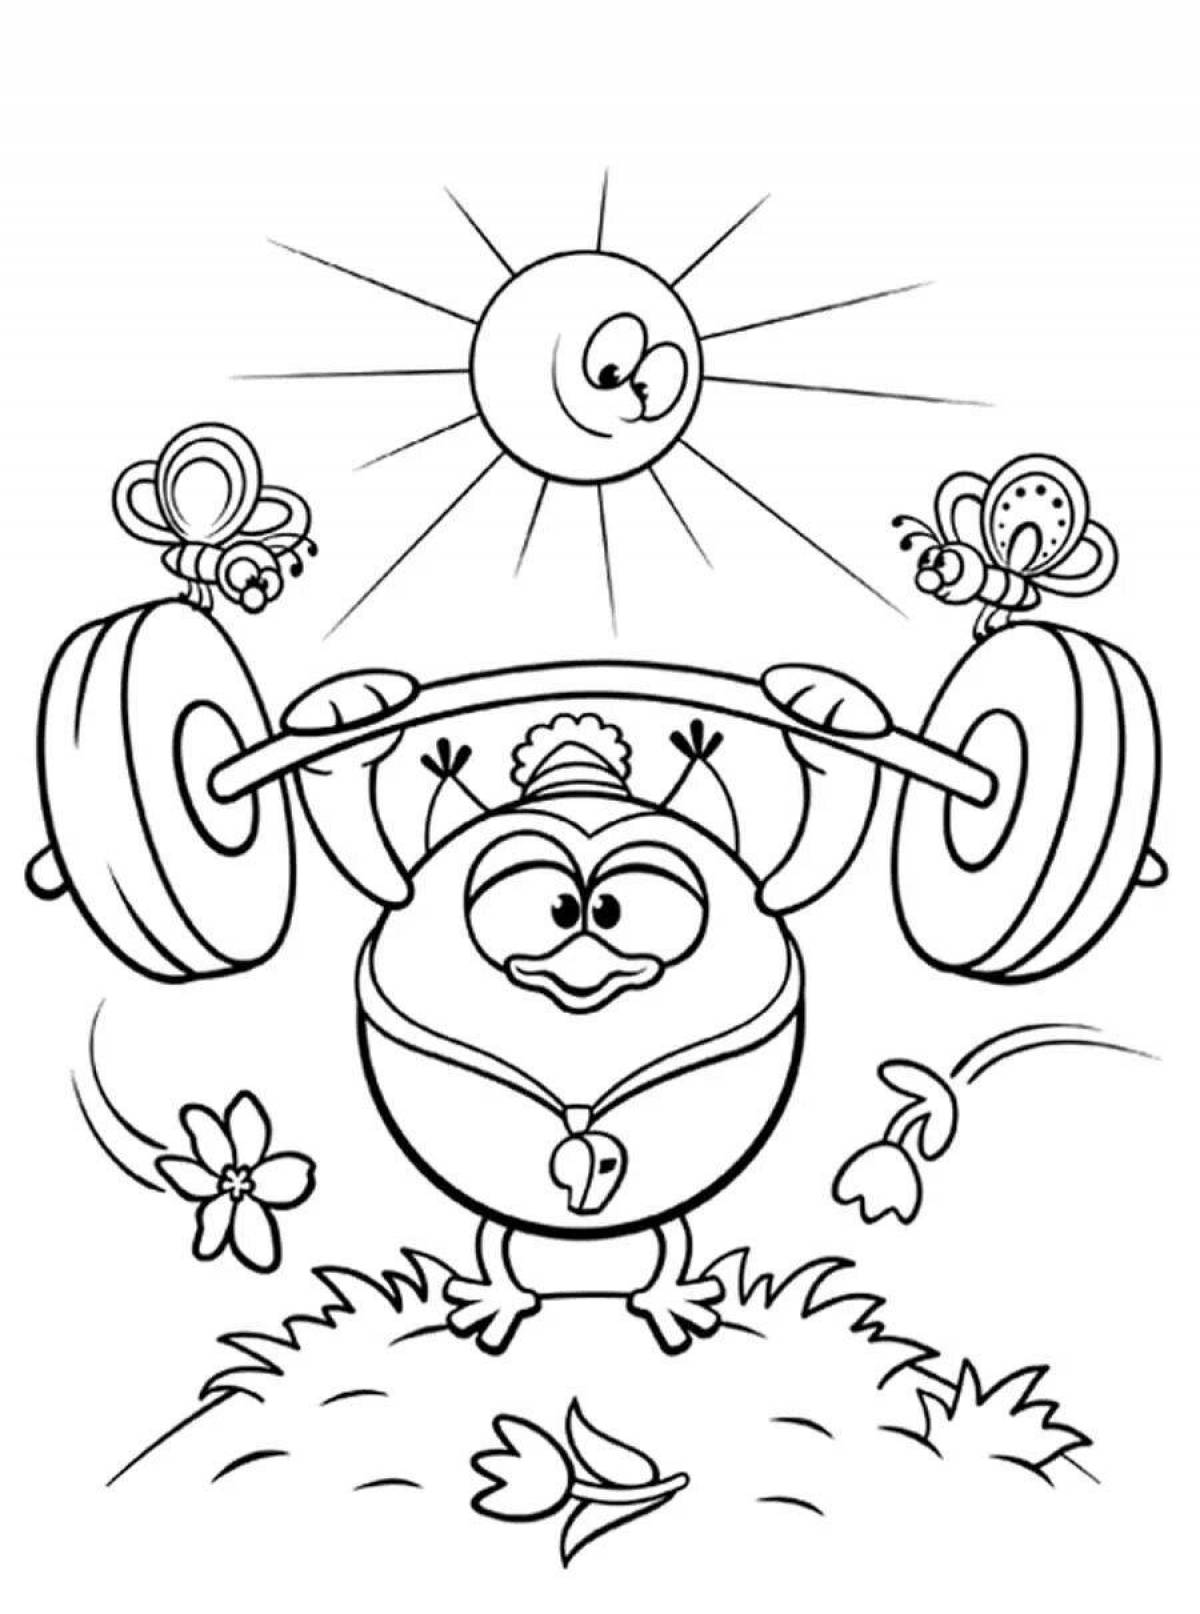 Colorful health coloring pages for kids